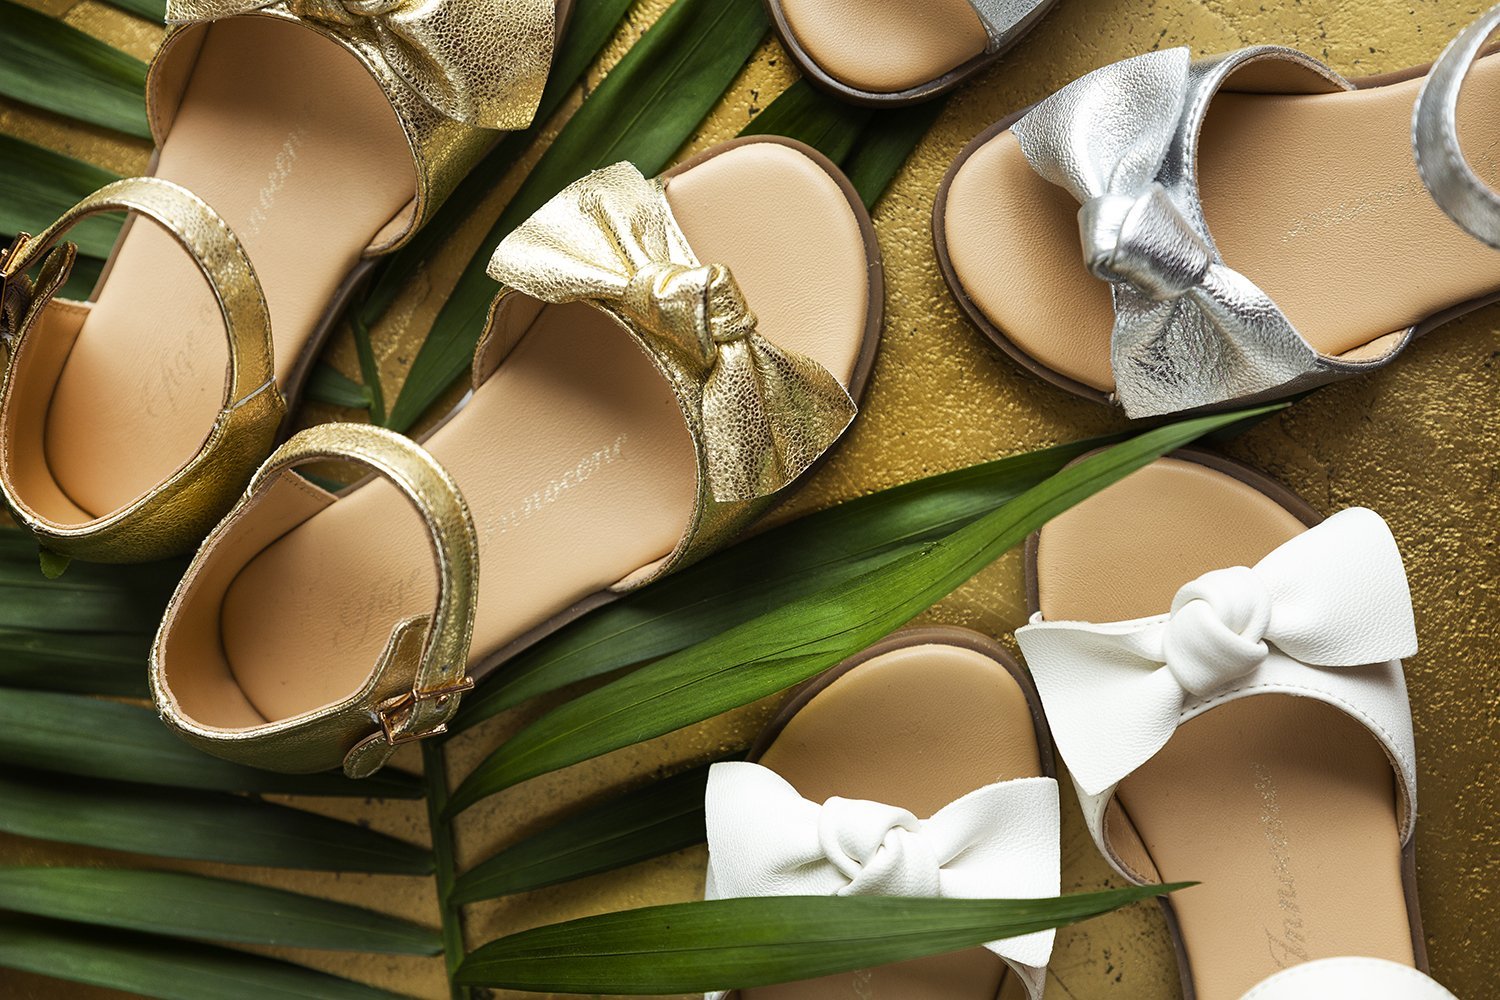 Margo Gold Sandals by Age of Innocence